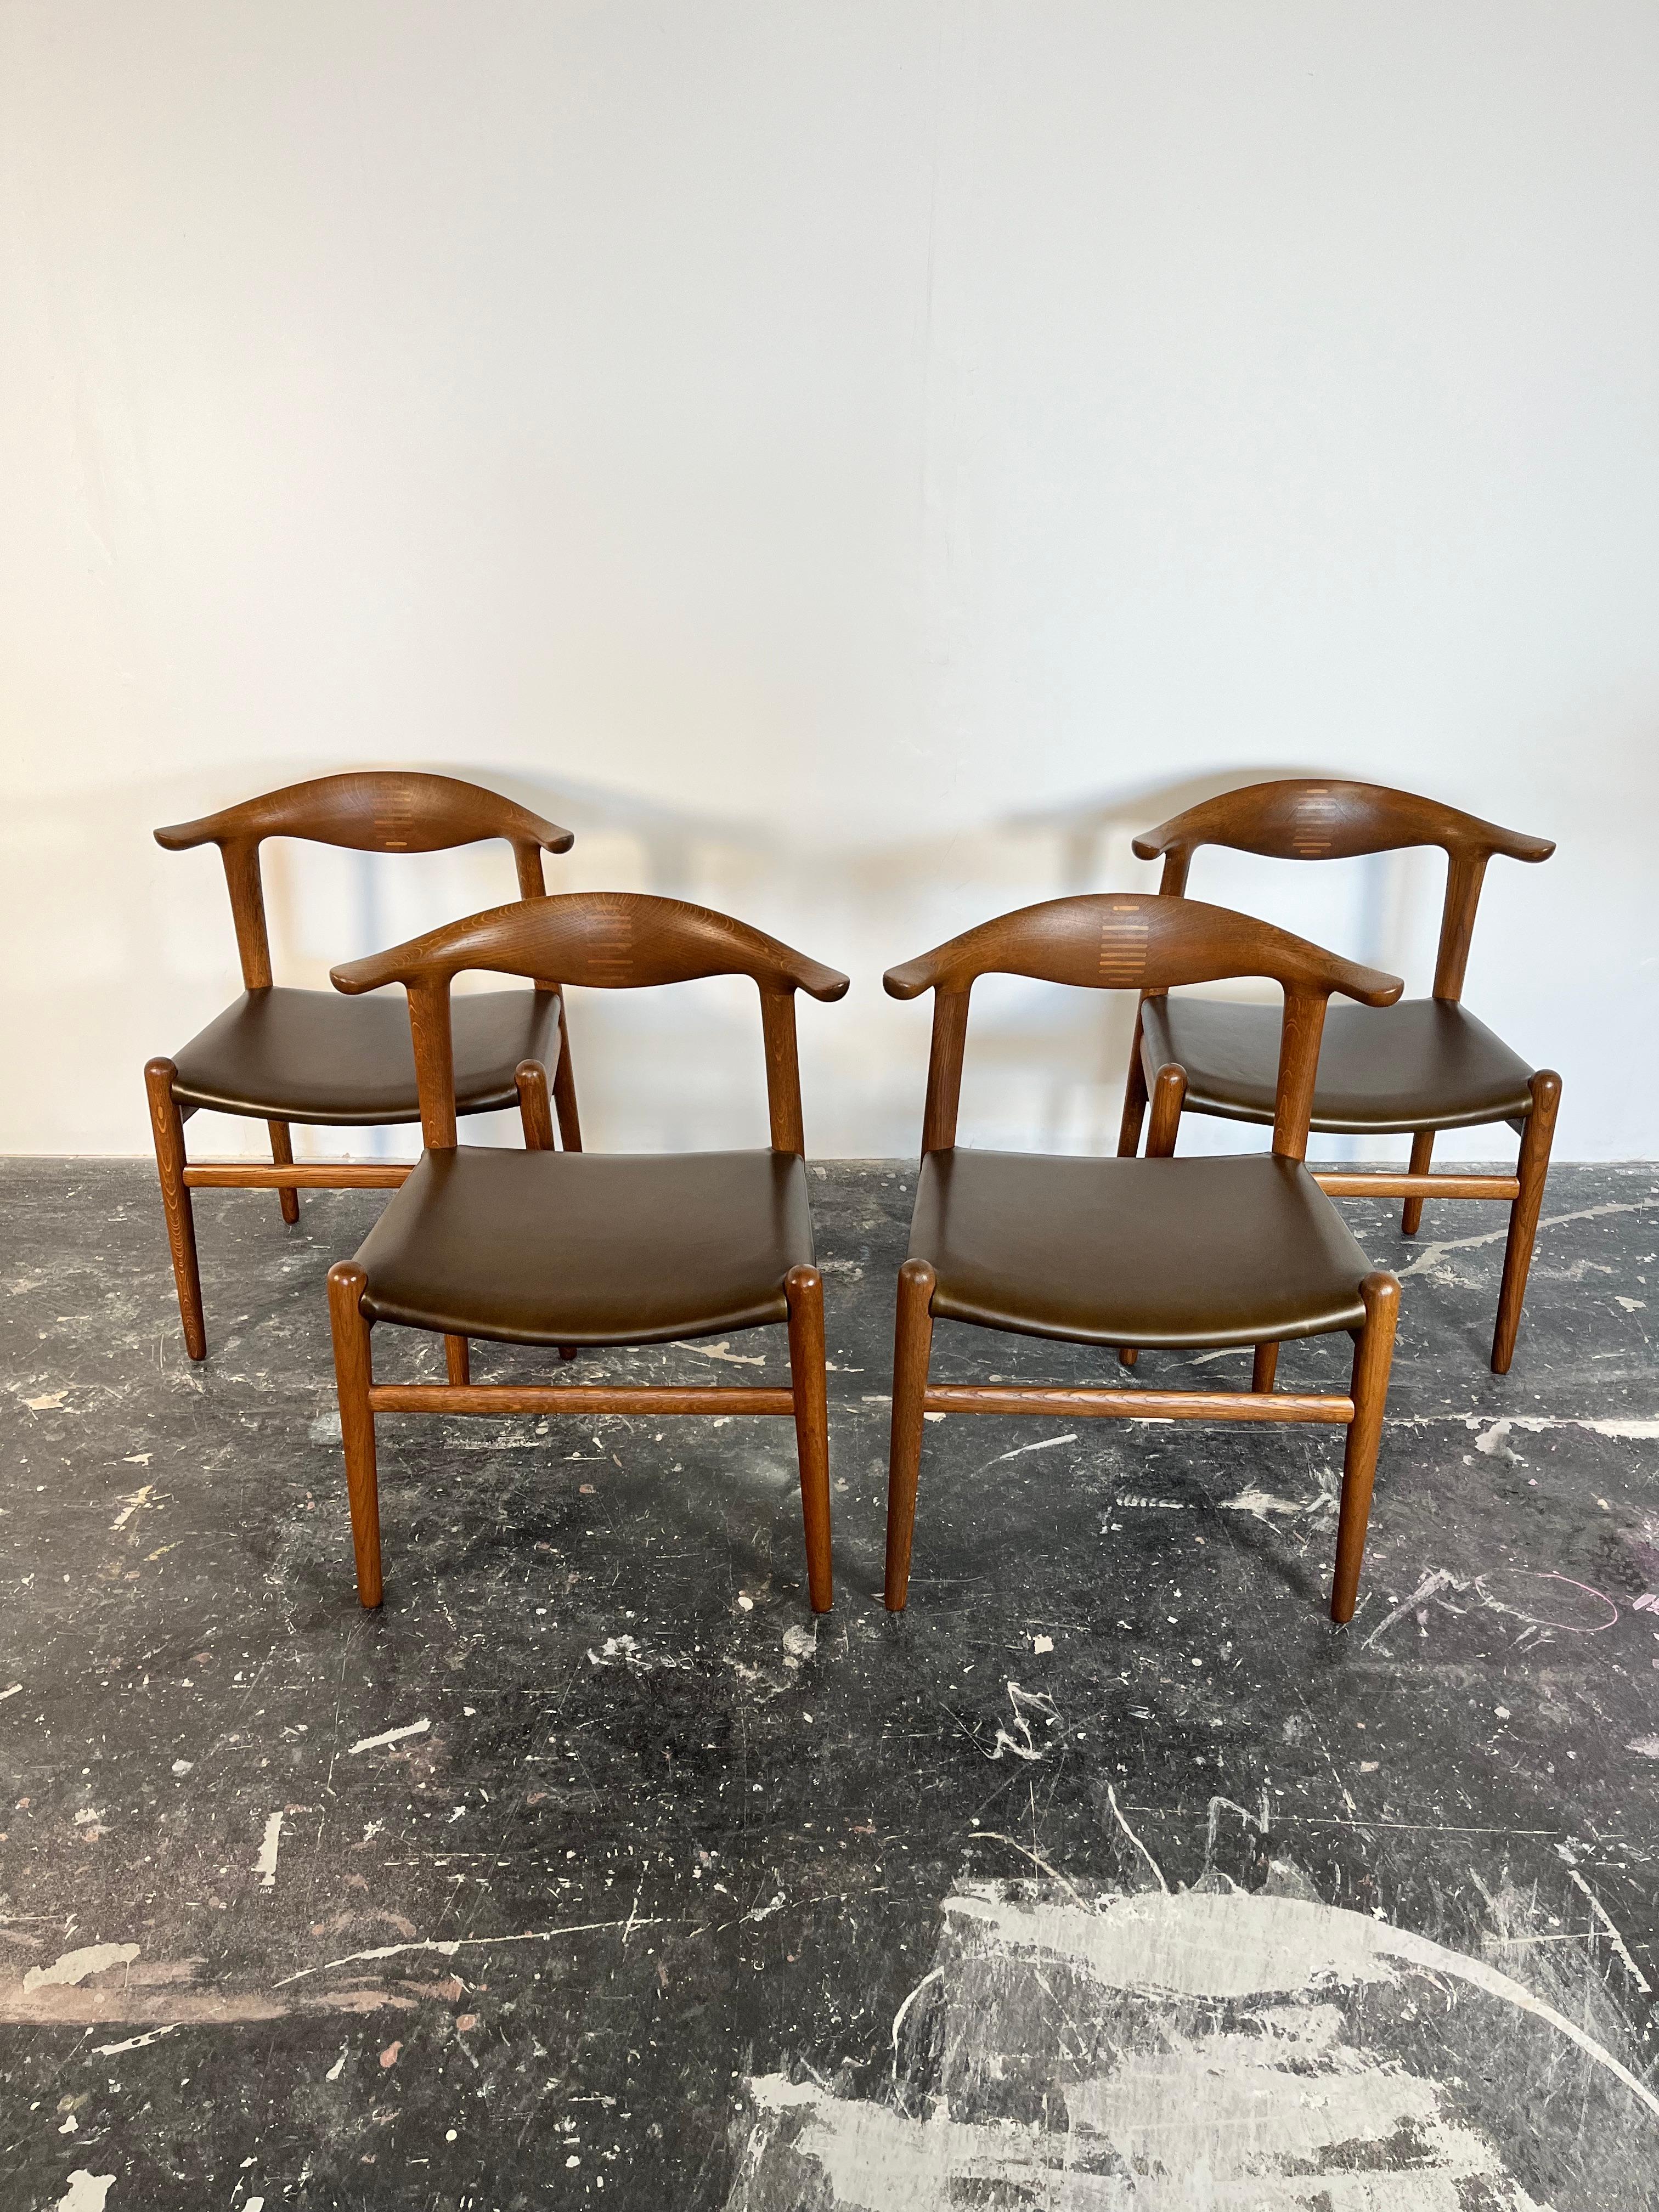 Set of 4 Restored Oak Cow Horn chairs by Hans Wegner with new olive green leather seats. 

This set of Cow Horn Chairs are rarely seen and extraordinarily crafted with inlays of Brazilian rosewood which lock the back joint. Metal tags on chair show